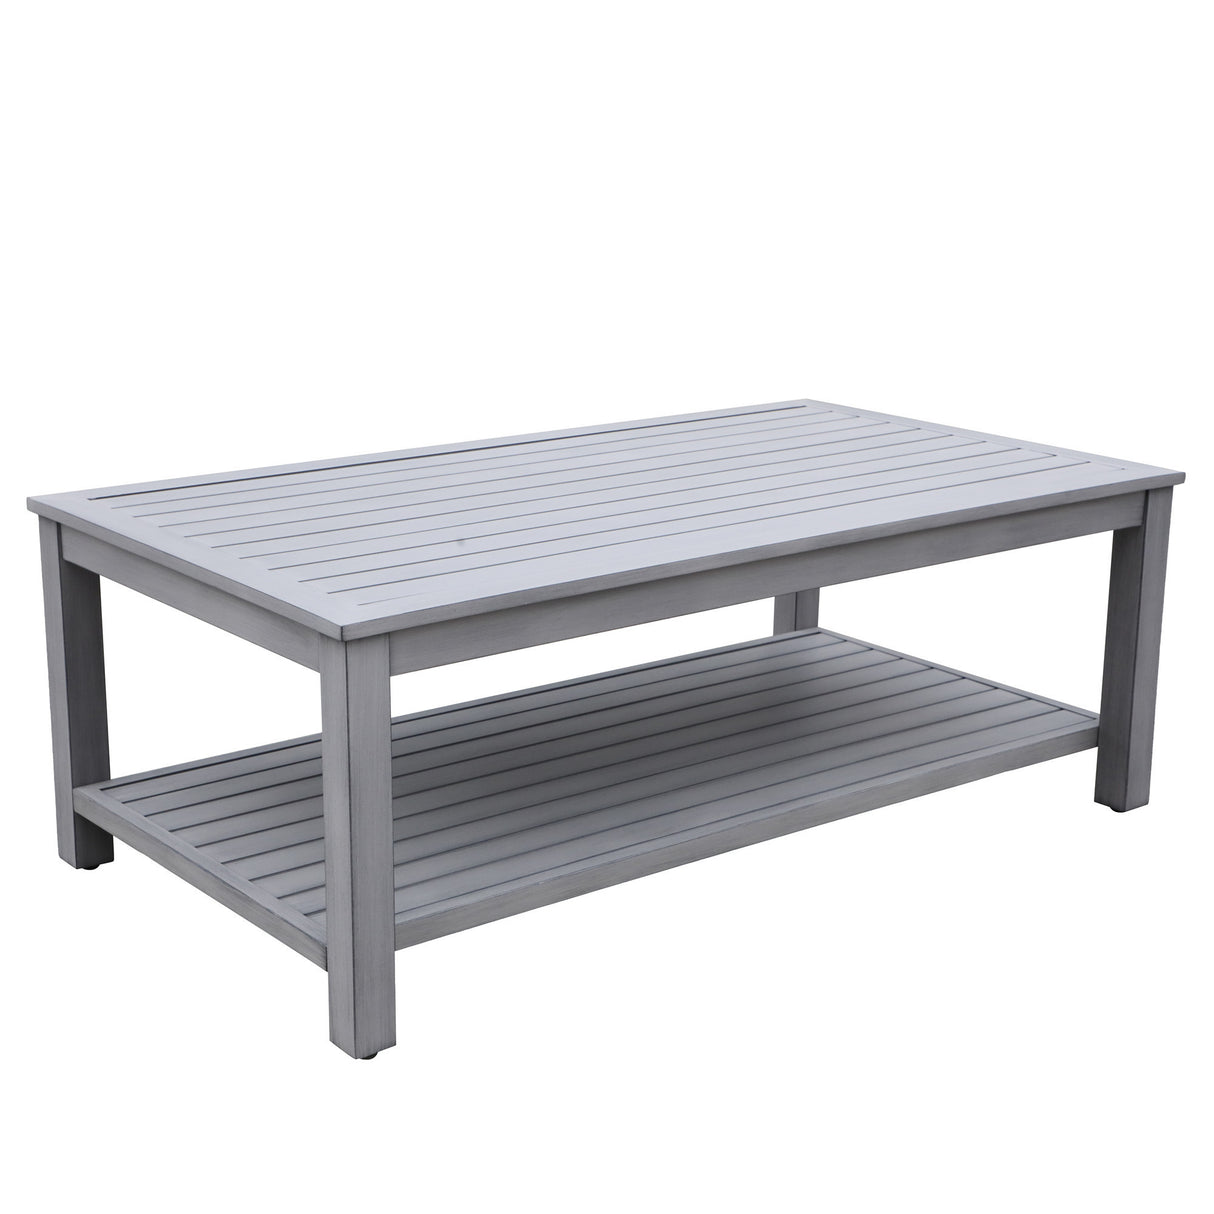 Octavia All-Weather Outdoor, Patio 5-Piece Aluminum Deep Seating Set with Water-Repellent Cushions for Deck, Backyards, Garden, Lawns, Poolside, and Beach.